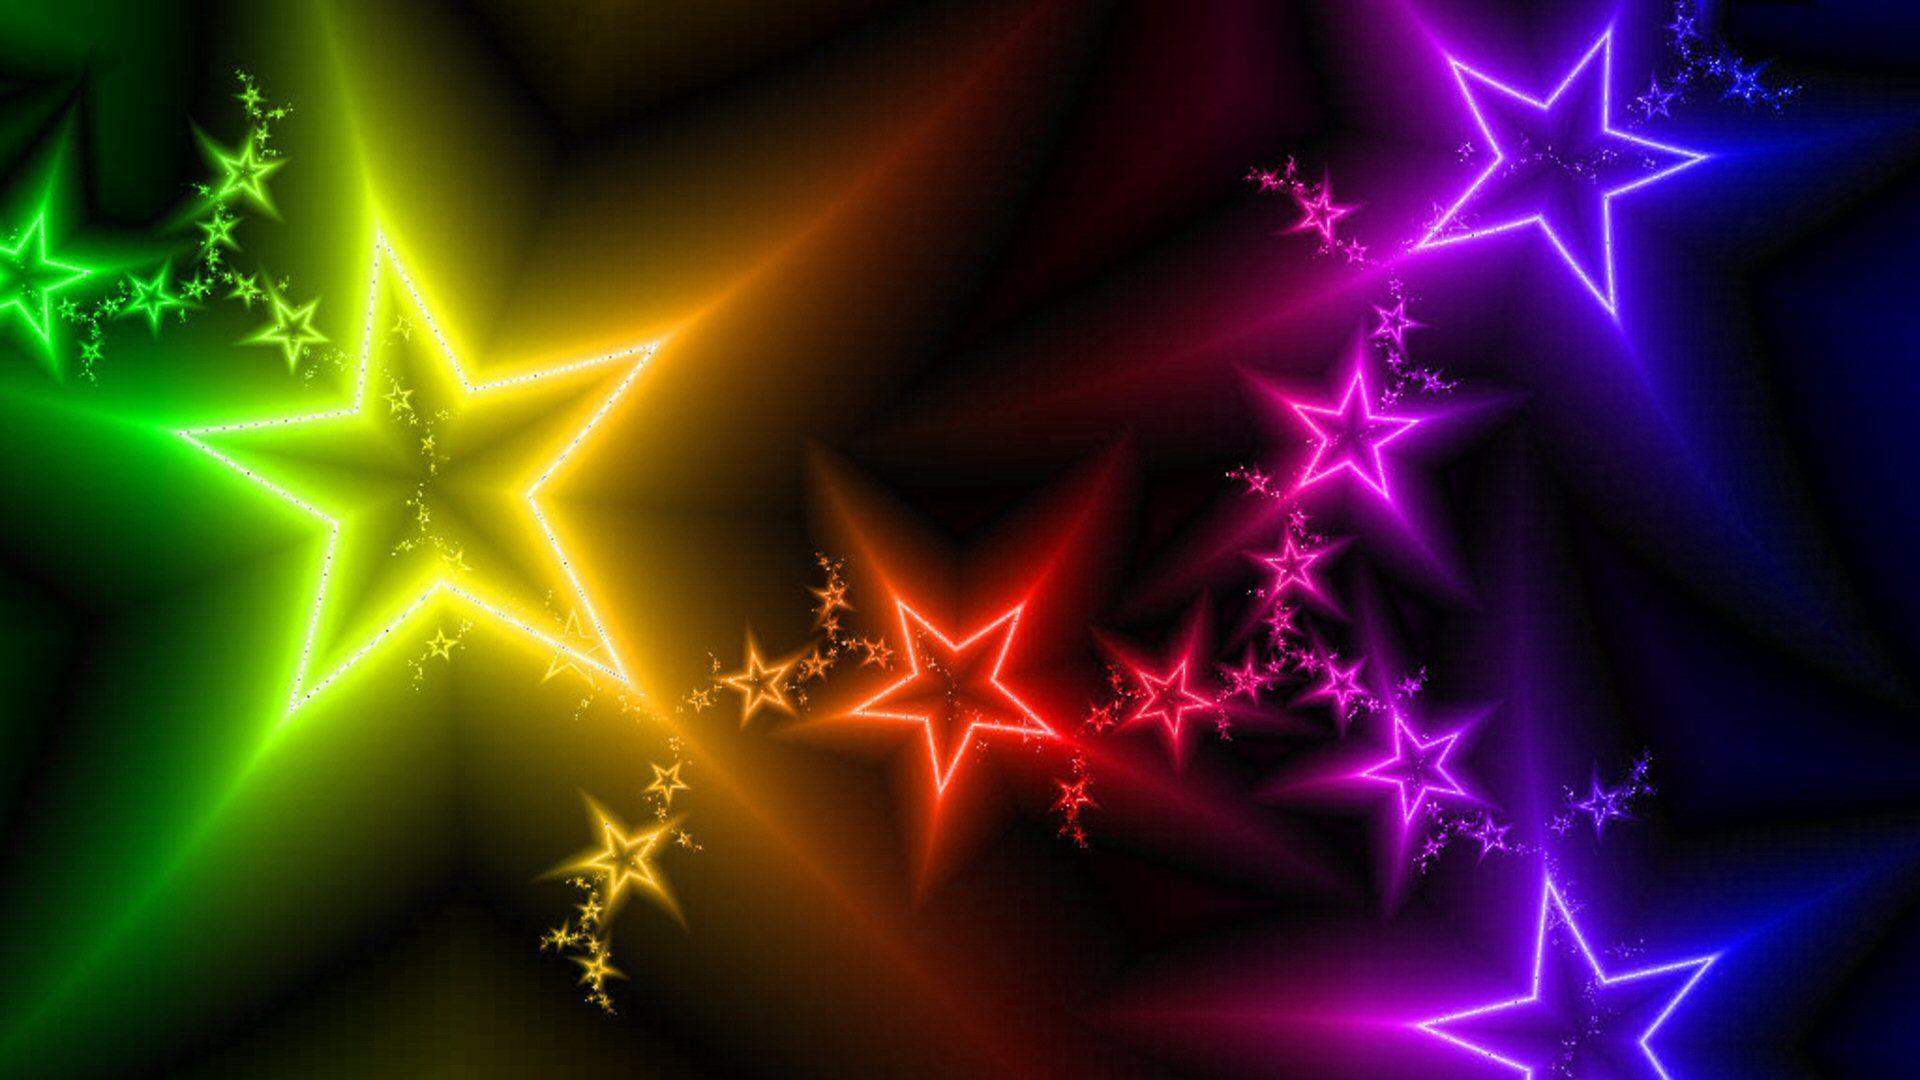 Star Backgrounds Wallpaper Cave